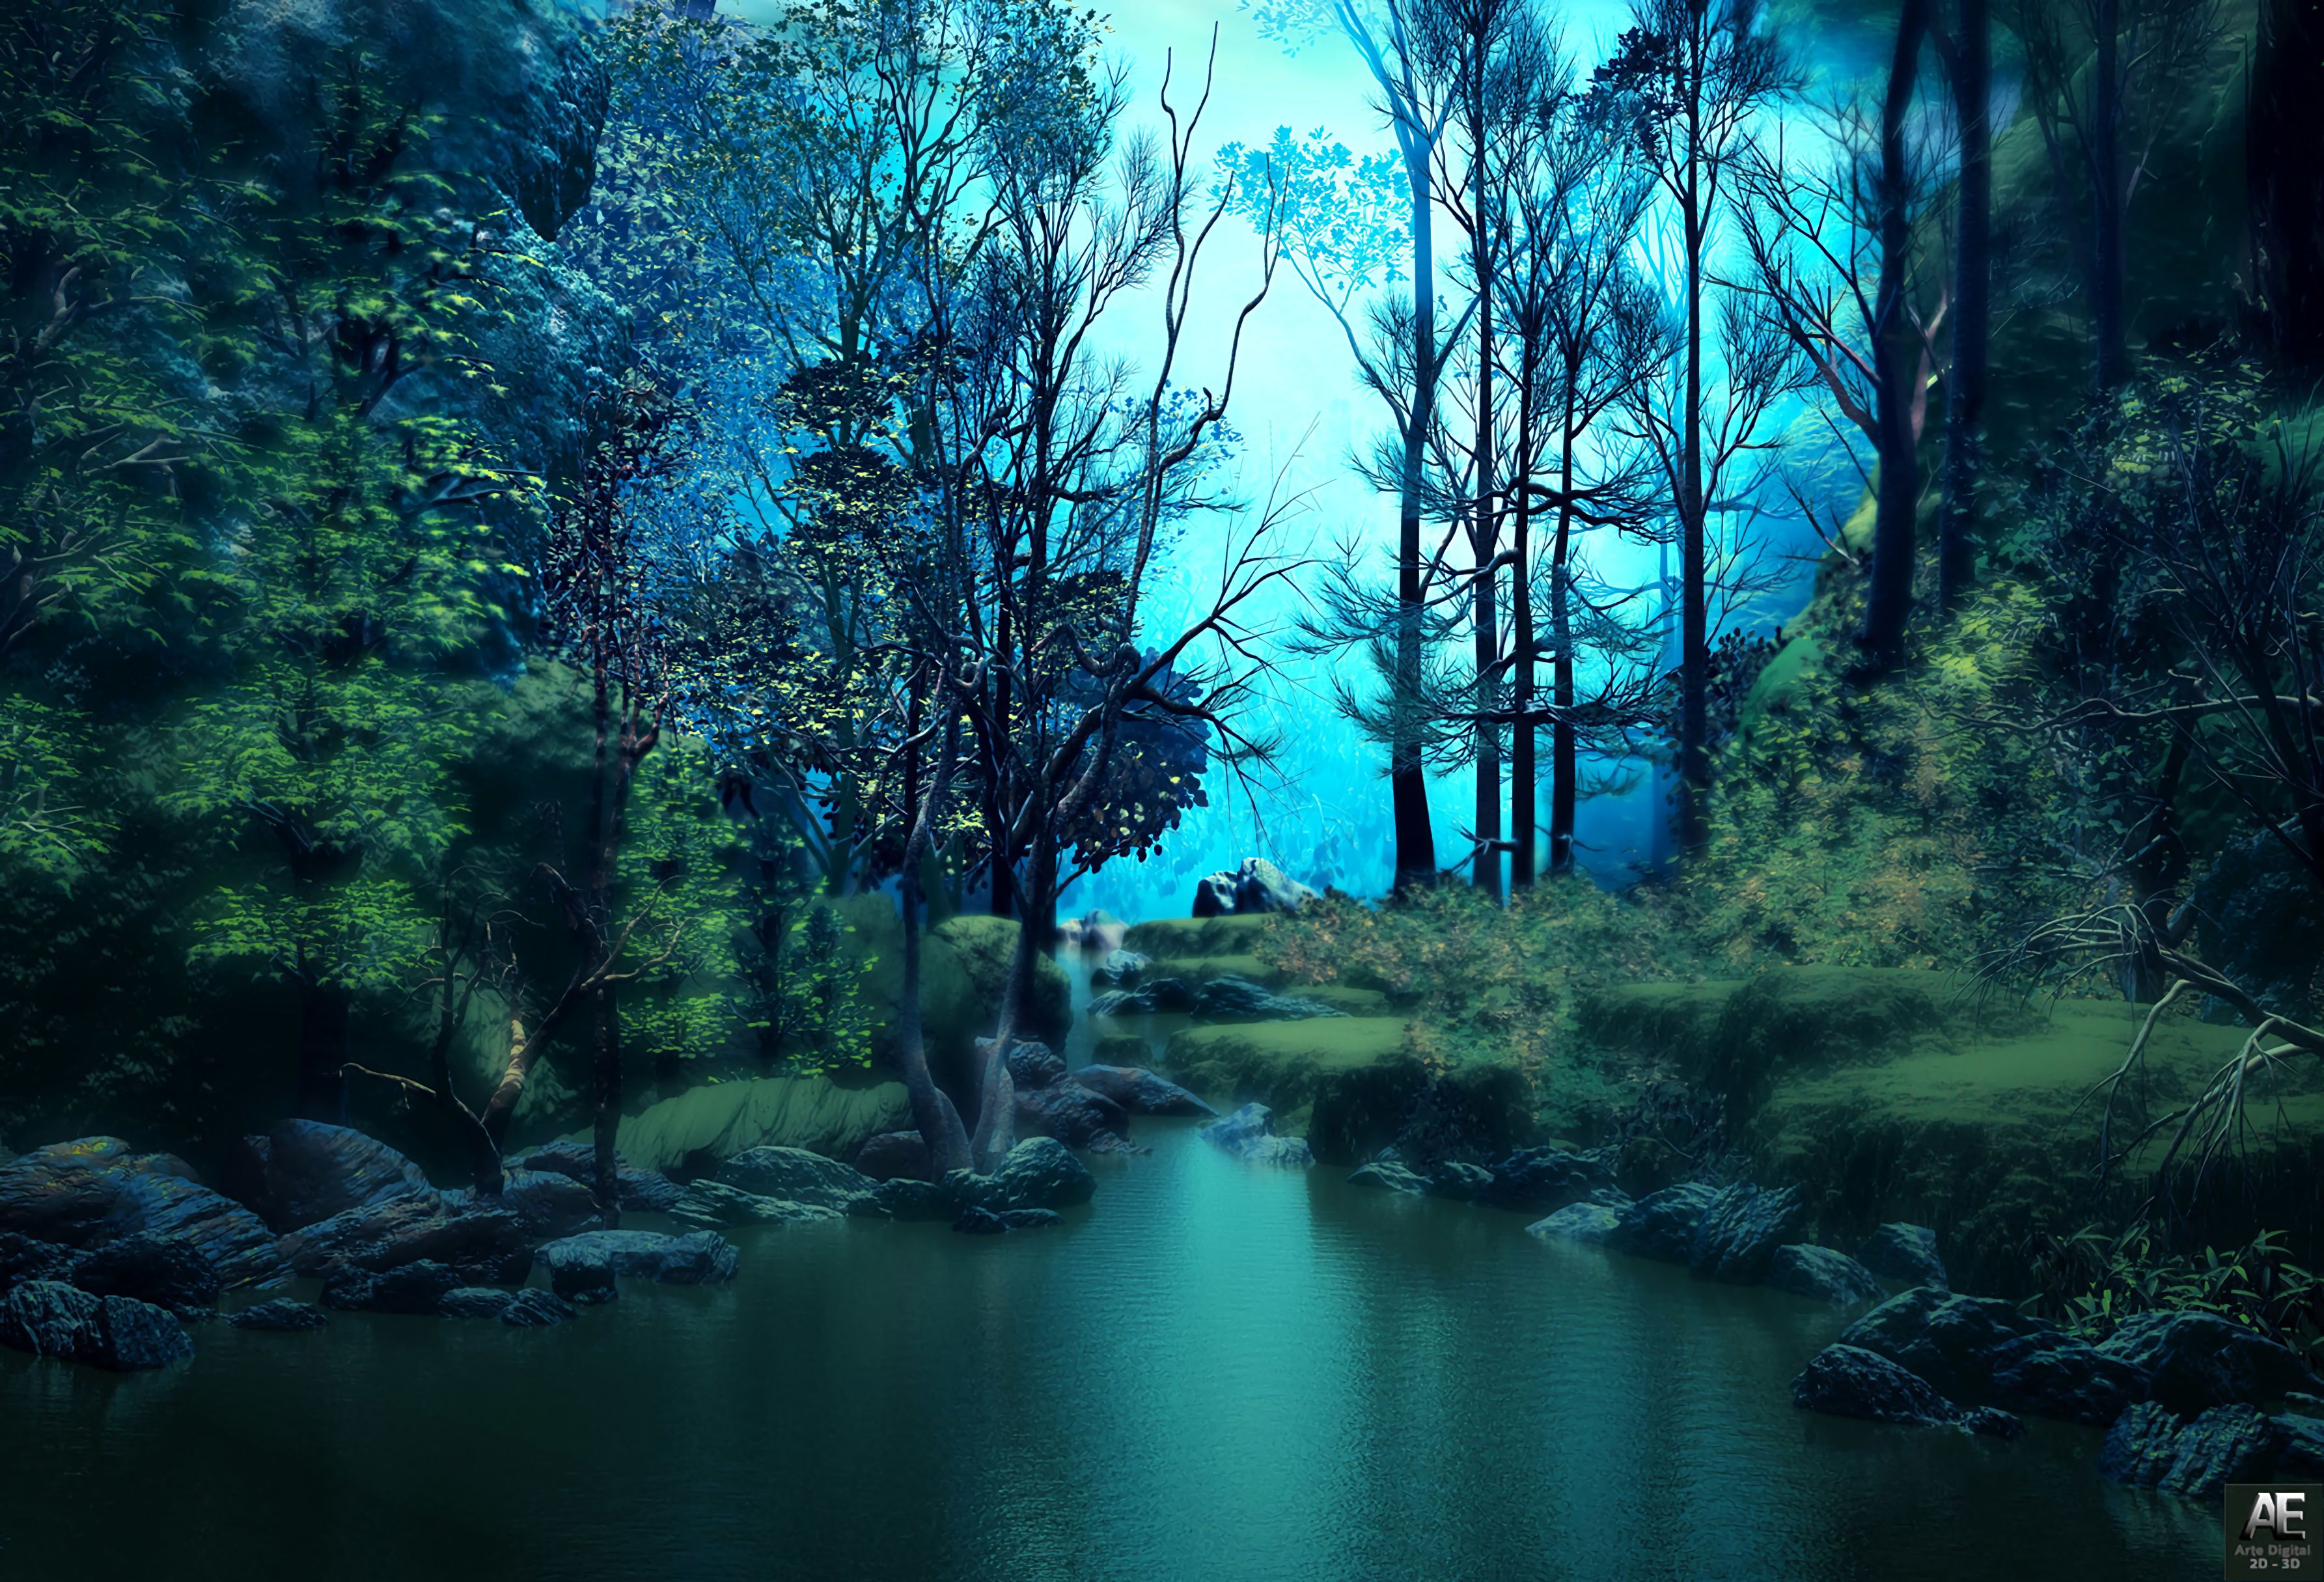 156792 download wallpaper forest, water, trees, art, pond screensavers and pictures for free